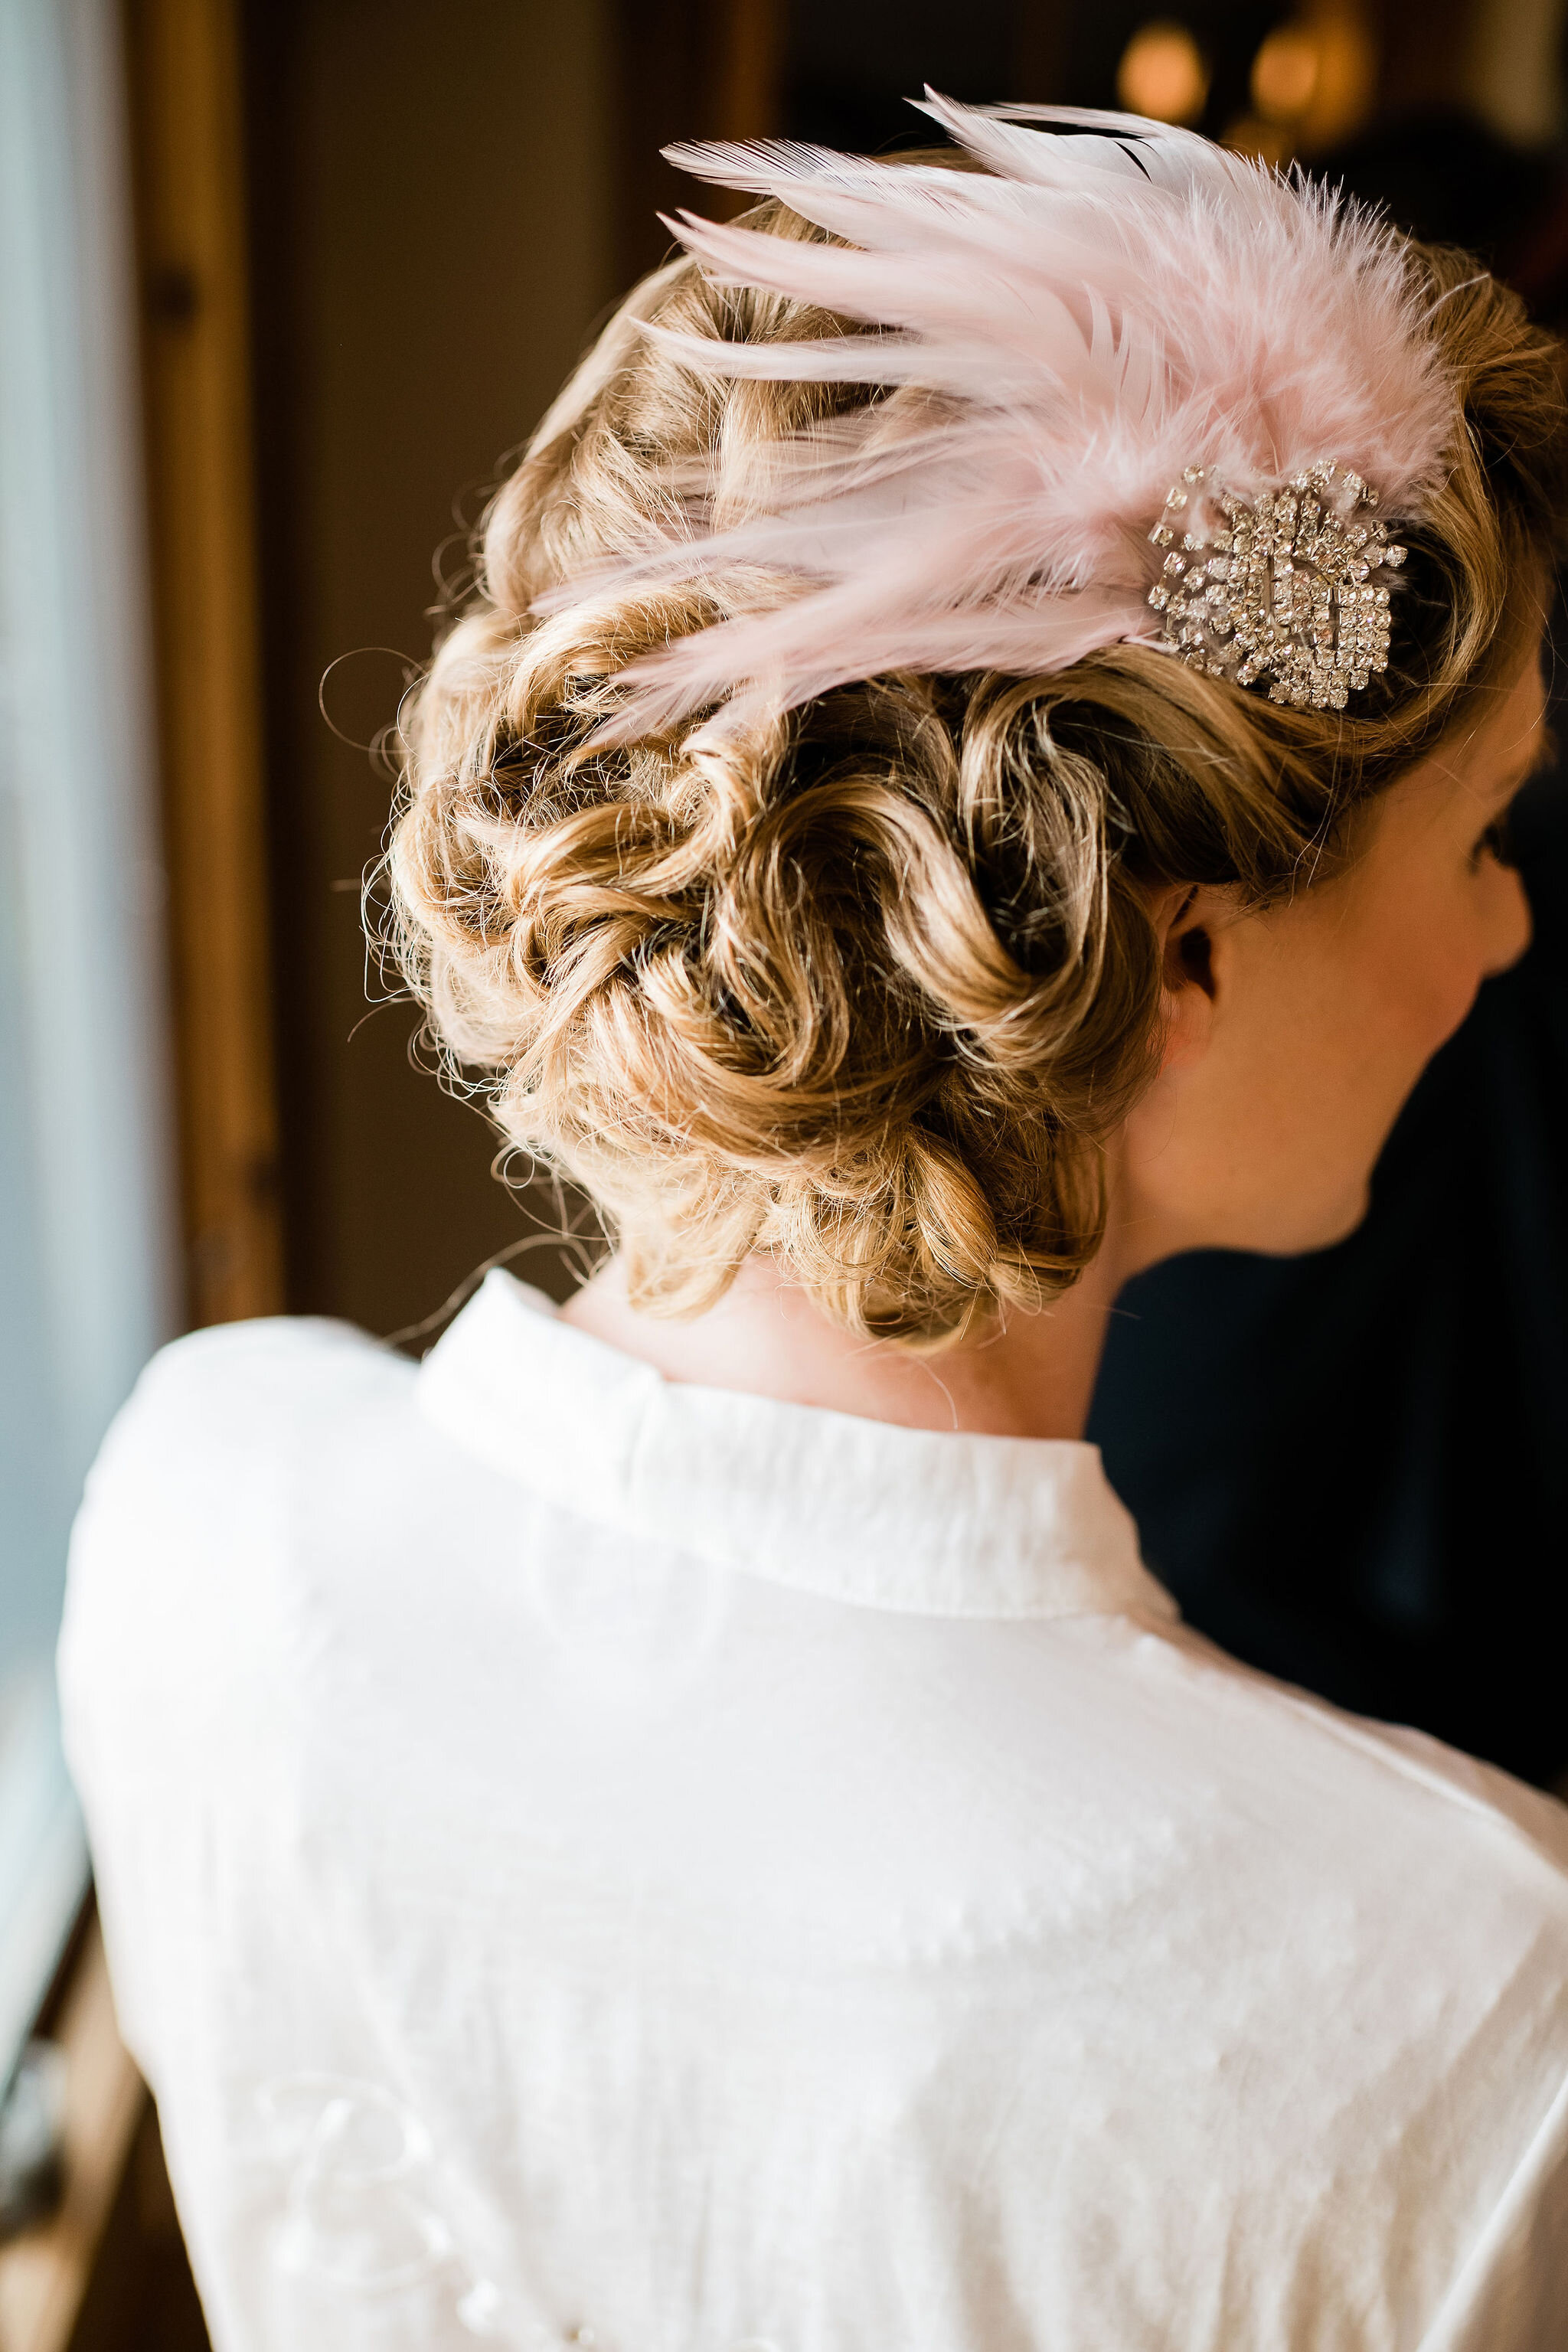 Back of bride's hair